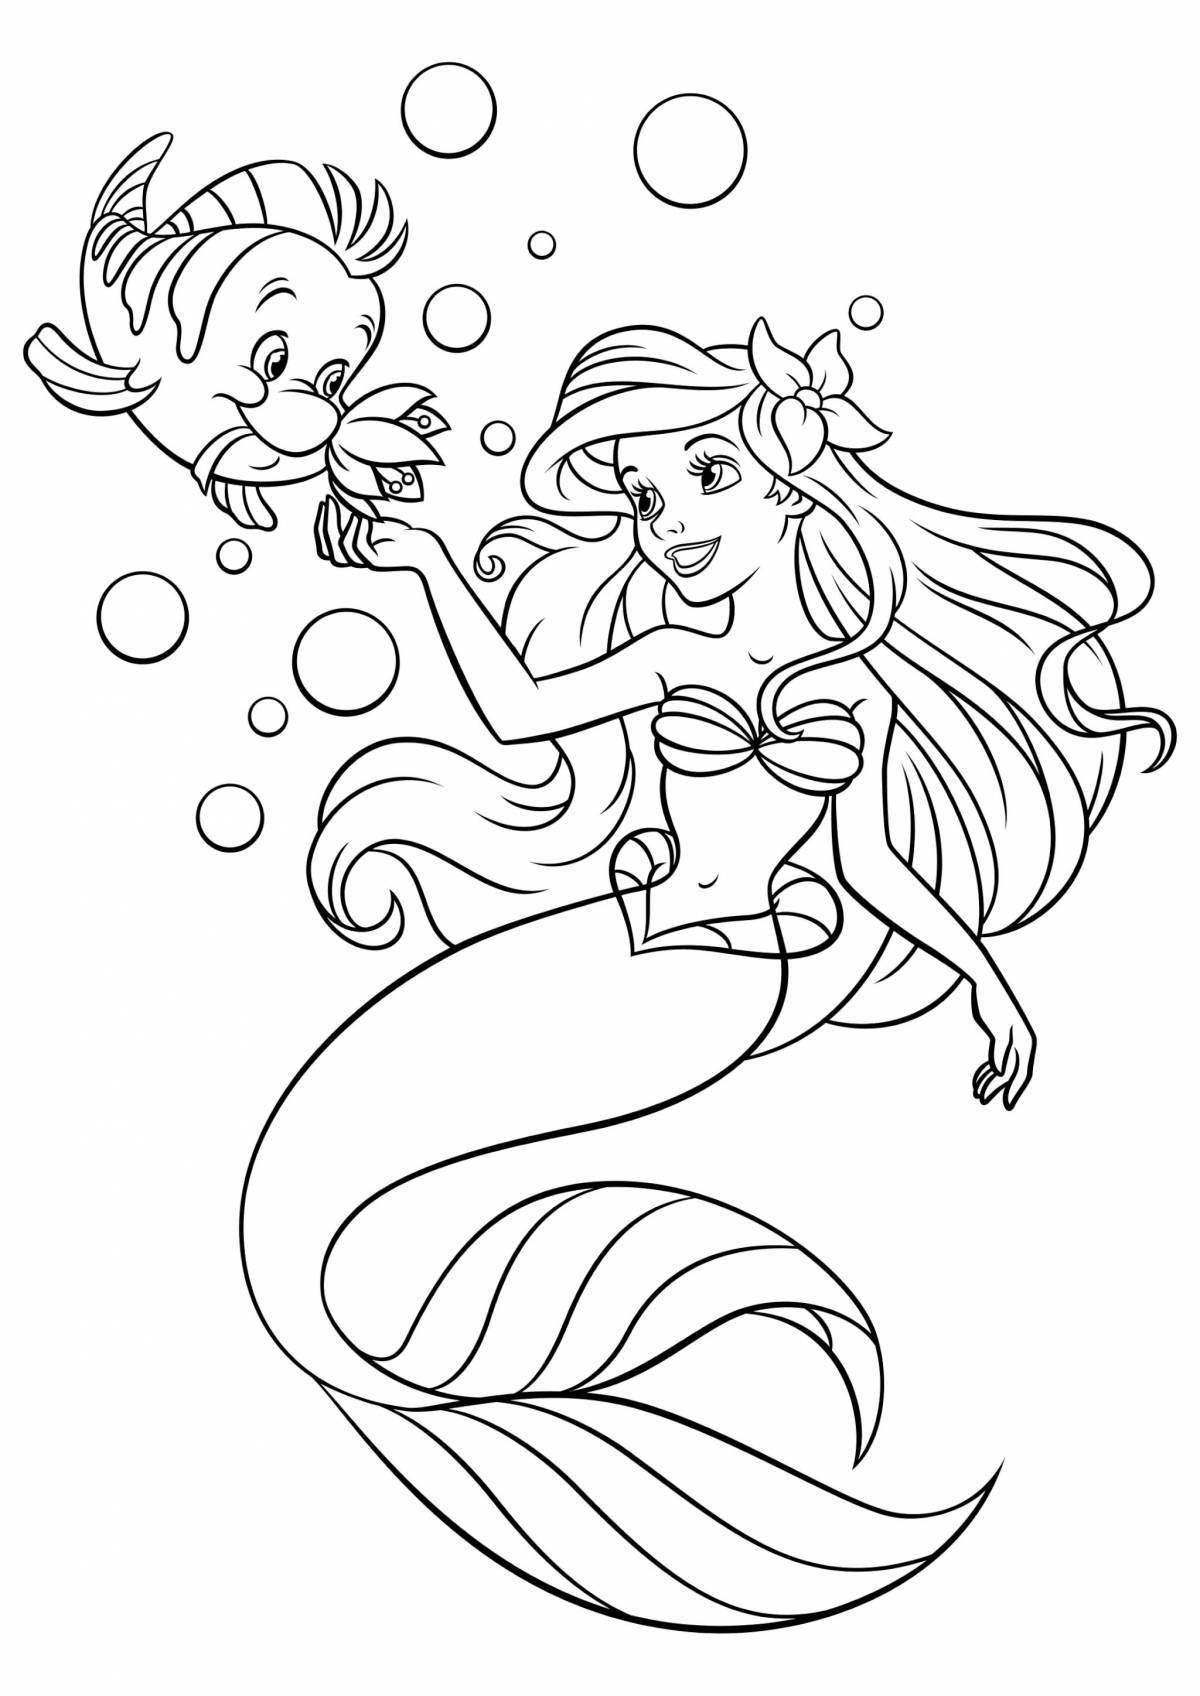 Fascinating mermaid coloring pages for girls